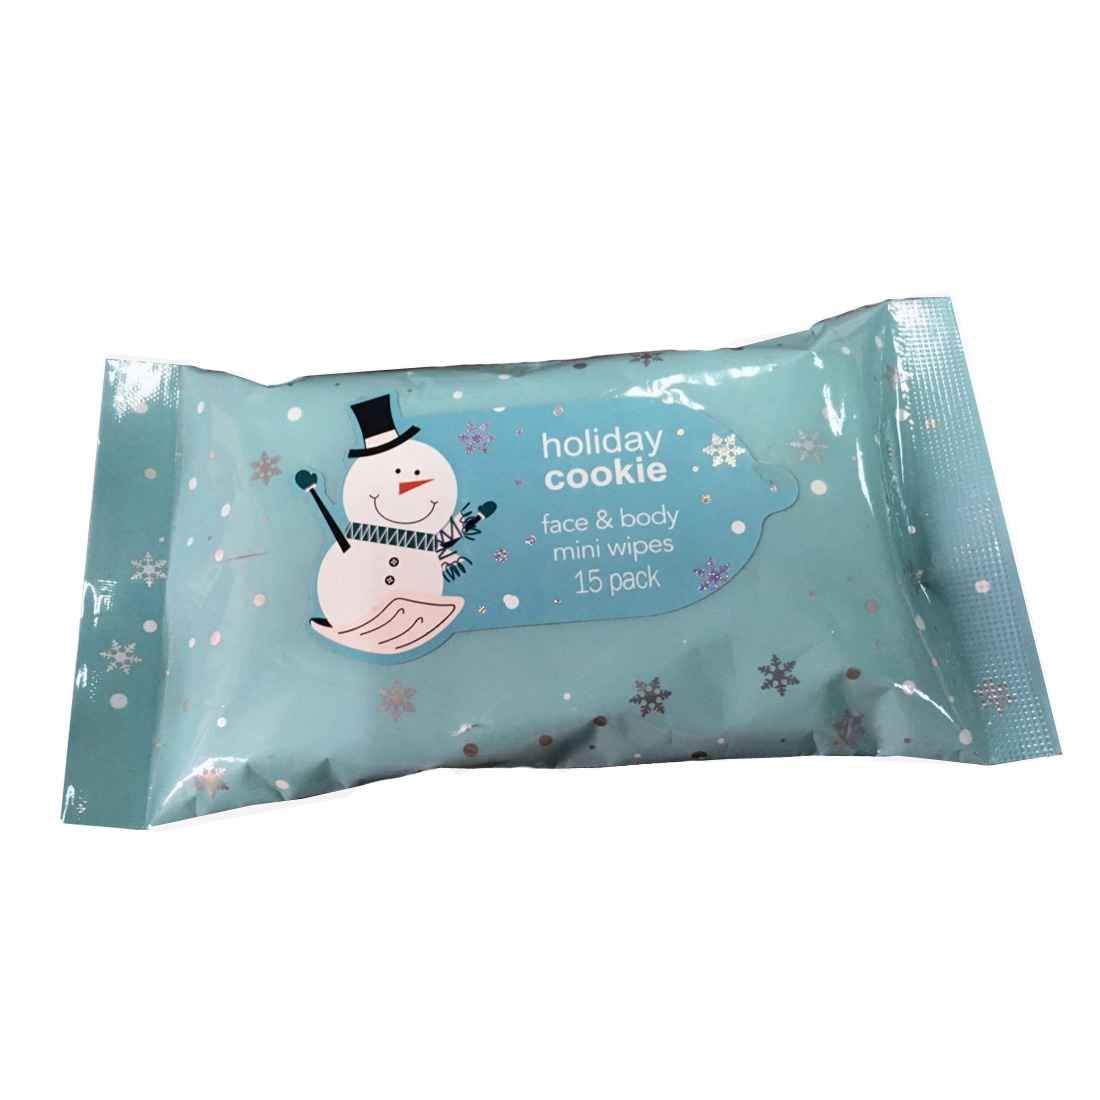 Holiday Cookie face and body mini wipes